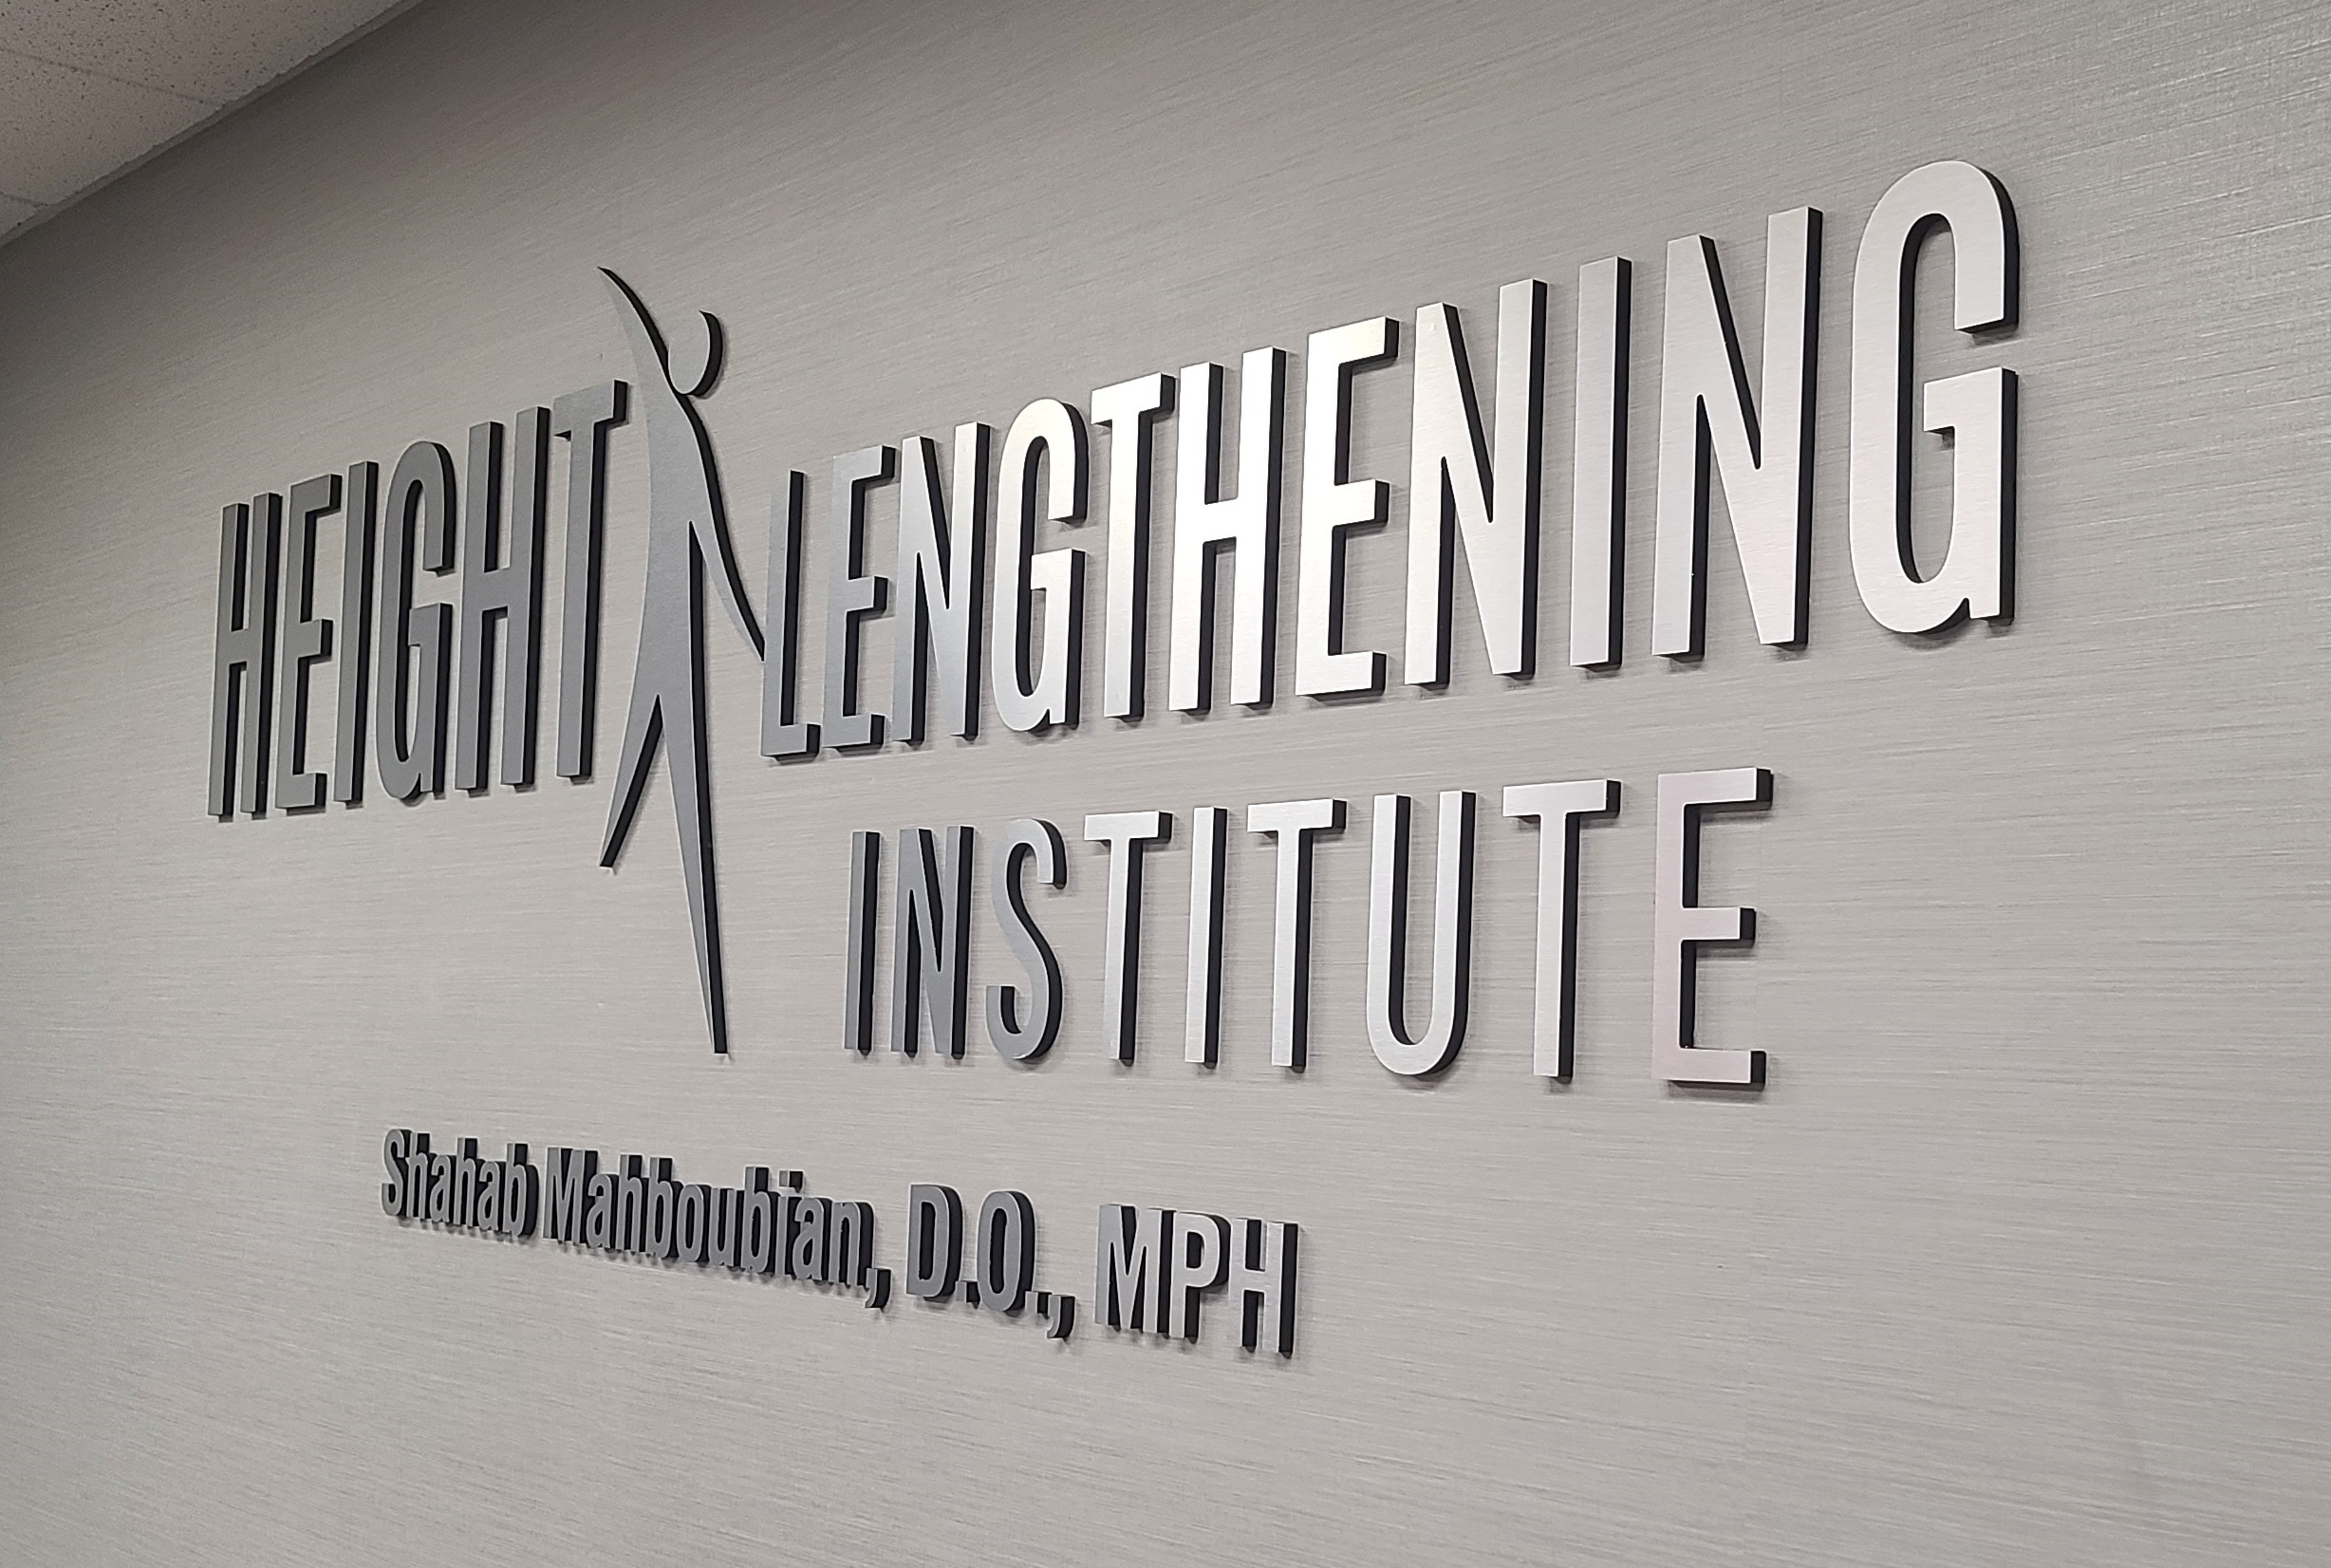 Our clinic lobby sign for the Height Lengthening Institute in Burbank enhances their office and makes the brand more visible to visiting patients.